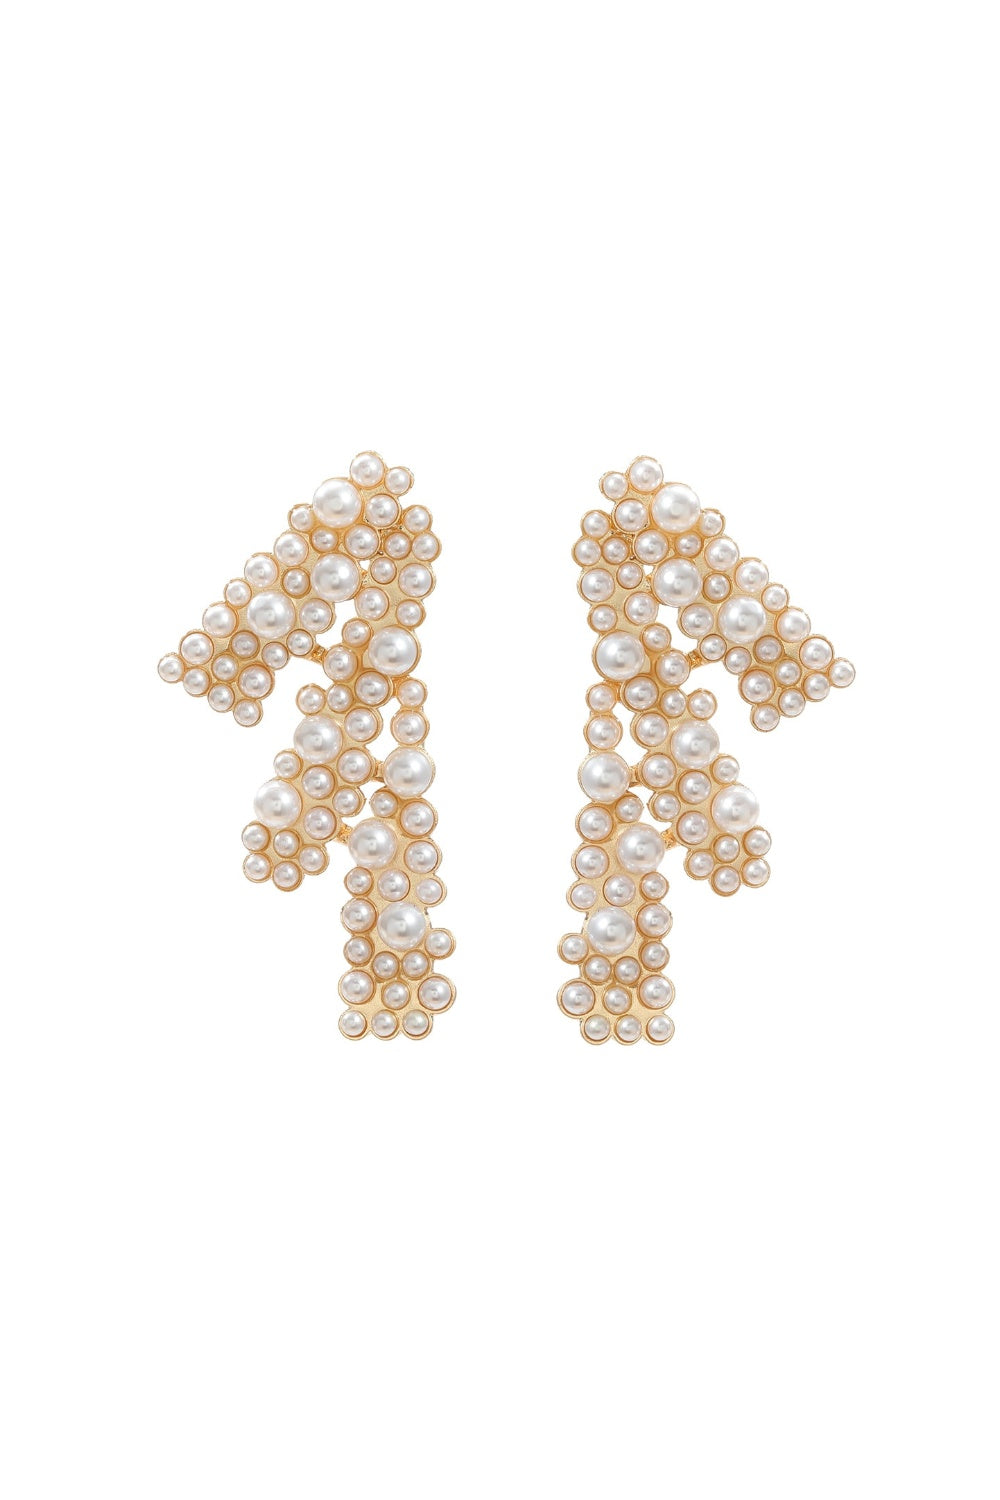 PARTY FAVOUR EARRINGS PEARL